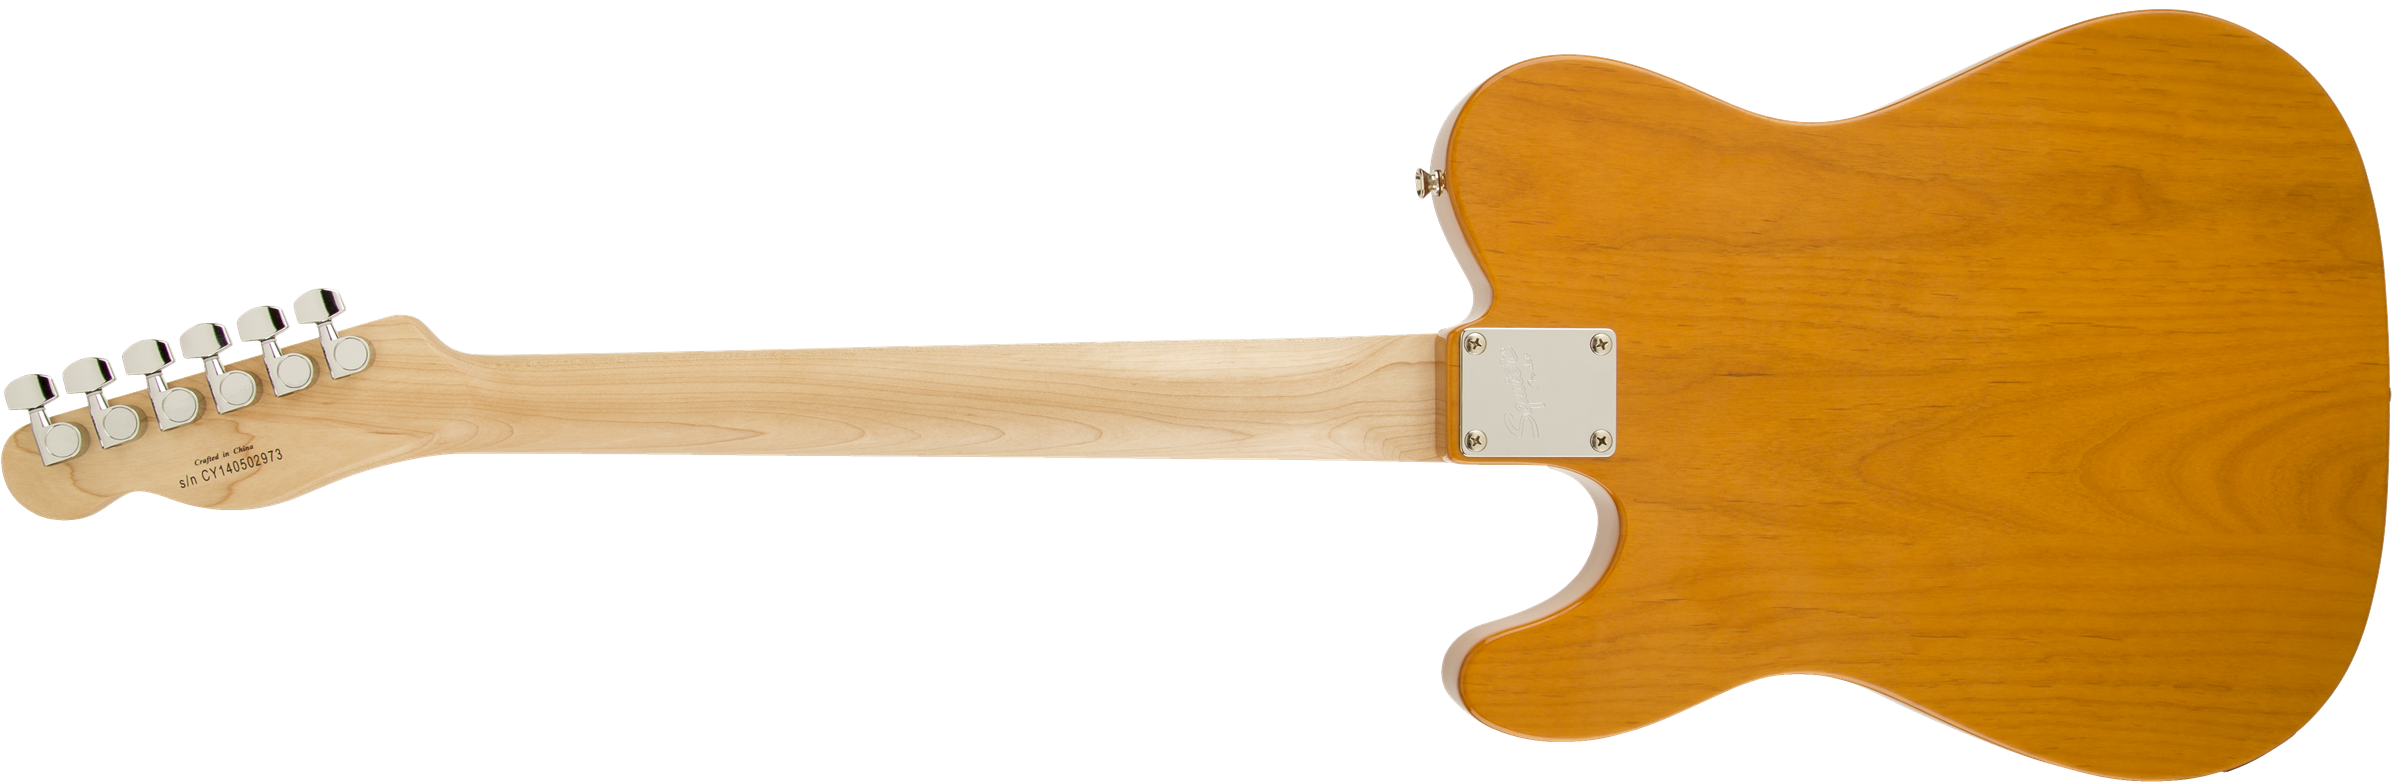 Squier Affinity Telecaster Butterscotch Blonde - Kendall Guitars